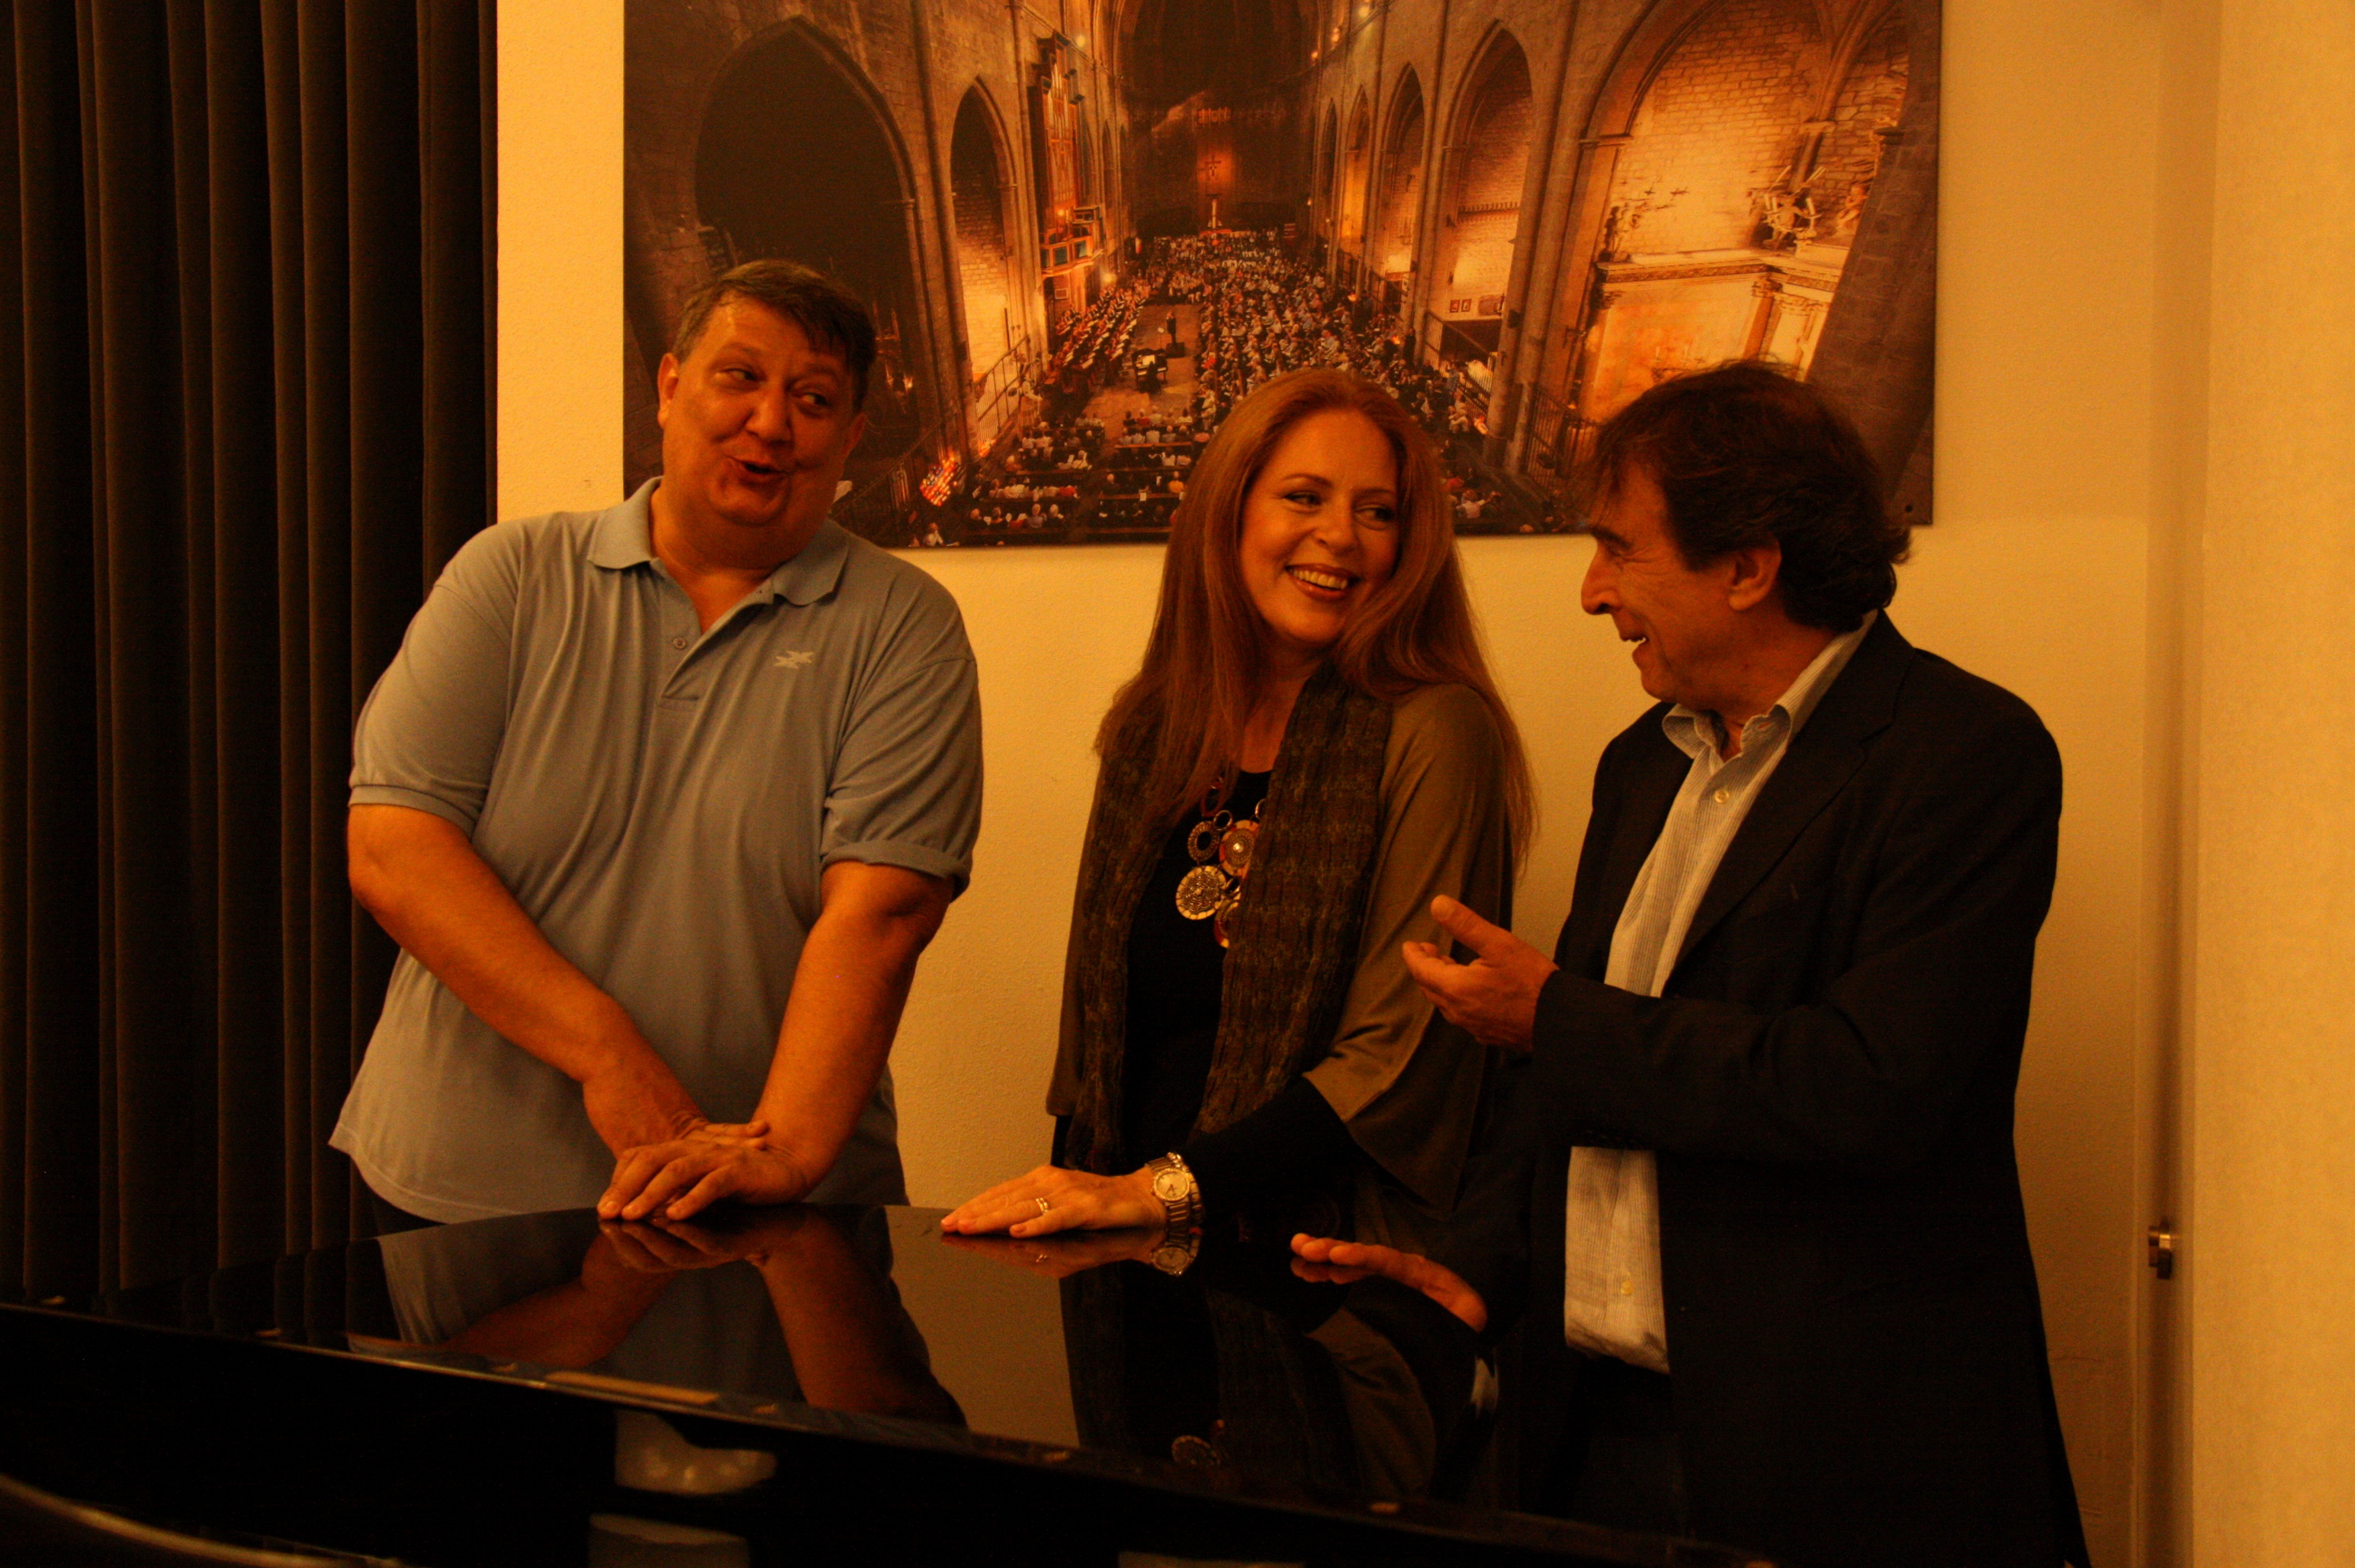 Daniele Abbado, stage director of 'Nabucco' on the right, soprano Martina Serafin and barítone Ambrogio Maestri on the left (by ACN)